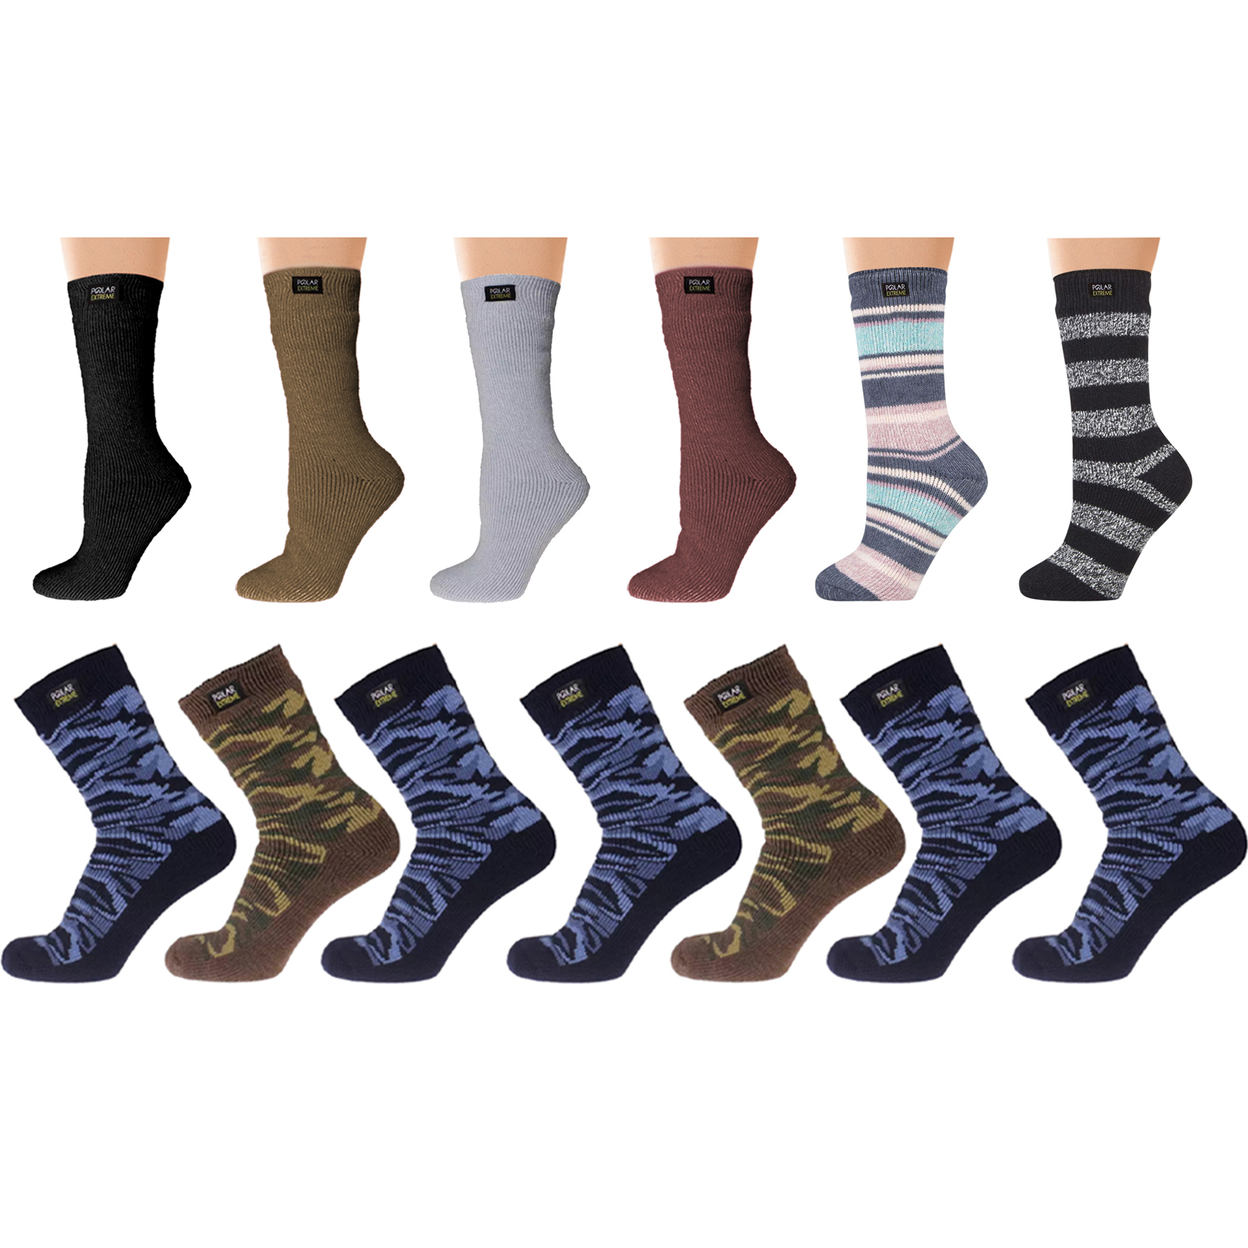 4-Pairs: Men's & Women's Polar Extreme Insulated Thermal Ultra-Soft Winter Warm Crew Socks - Female